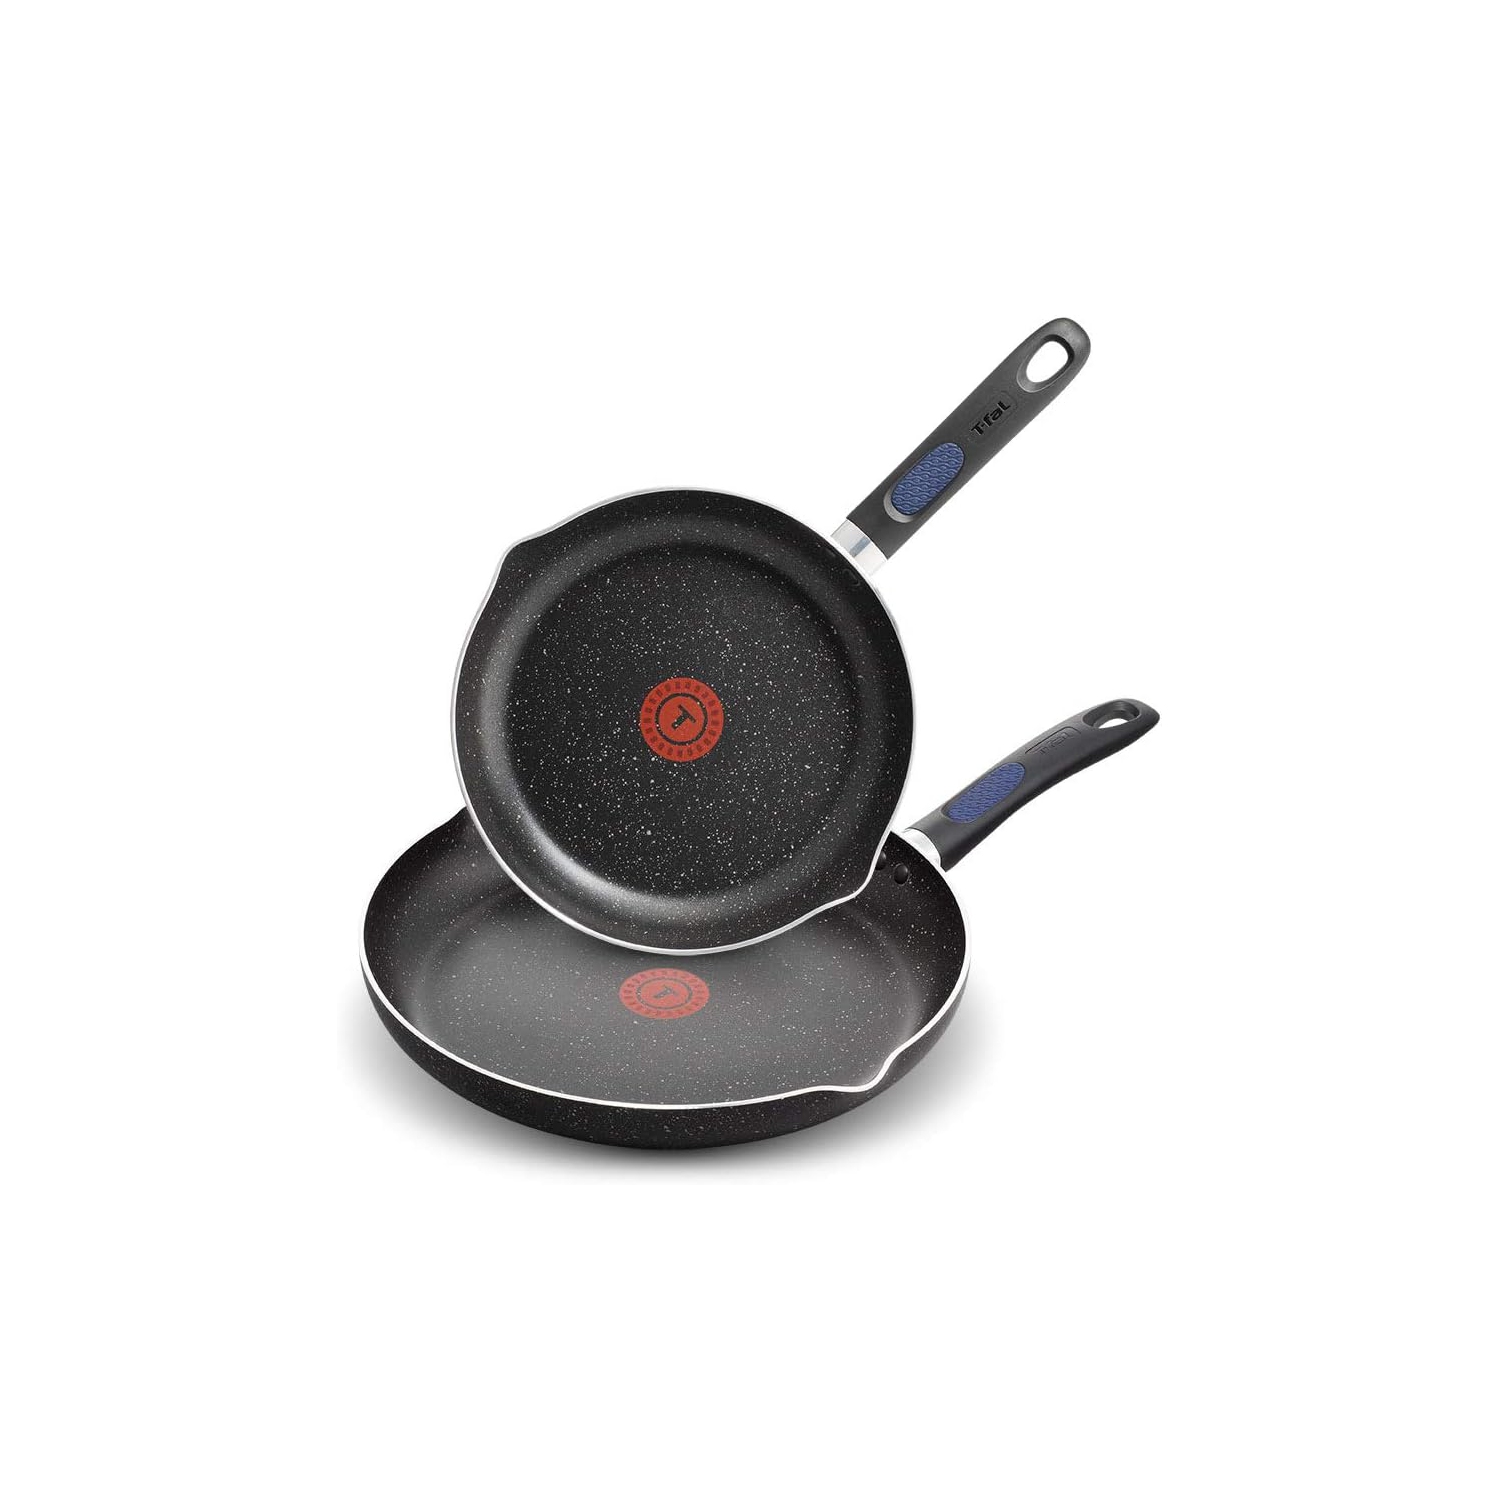 T-Fal Frying Pan Set, Non Stick Non Toxic Frying Pan,(24/30cm) , Thermo-Spot Heat Indicator, Dishwasher Safe, 2 pack